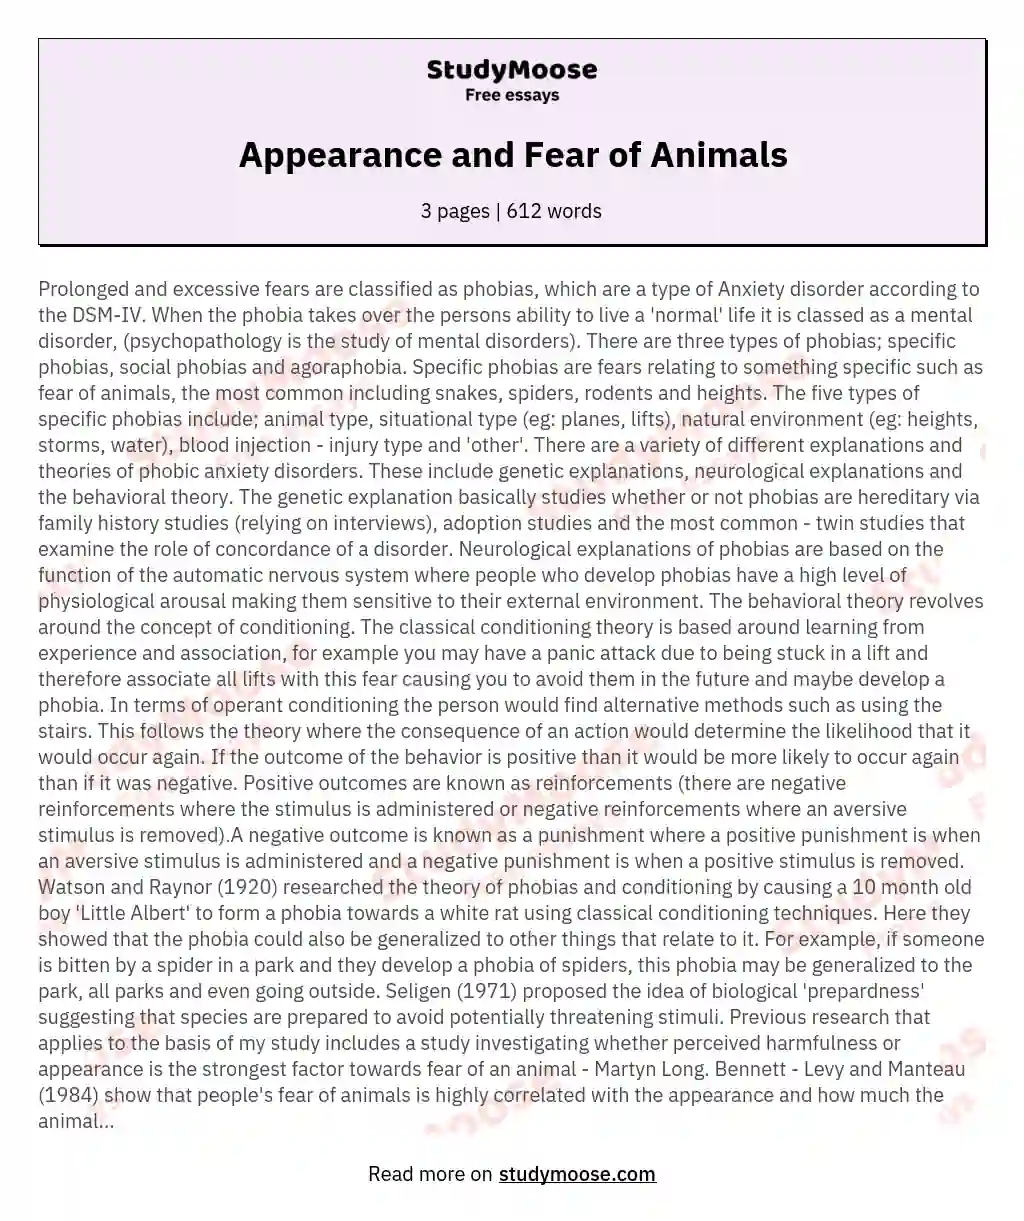 Appearance and Fear of Animals Free Essay Example